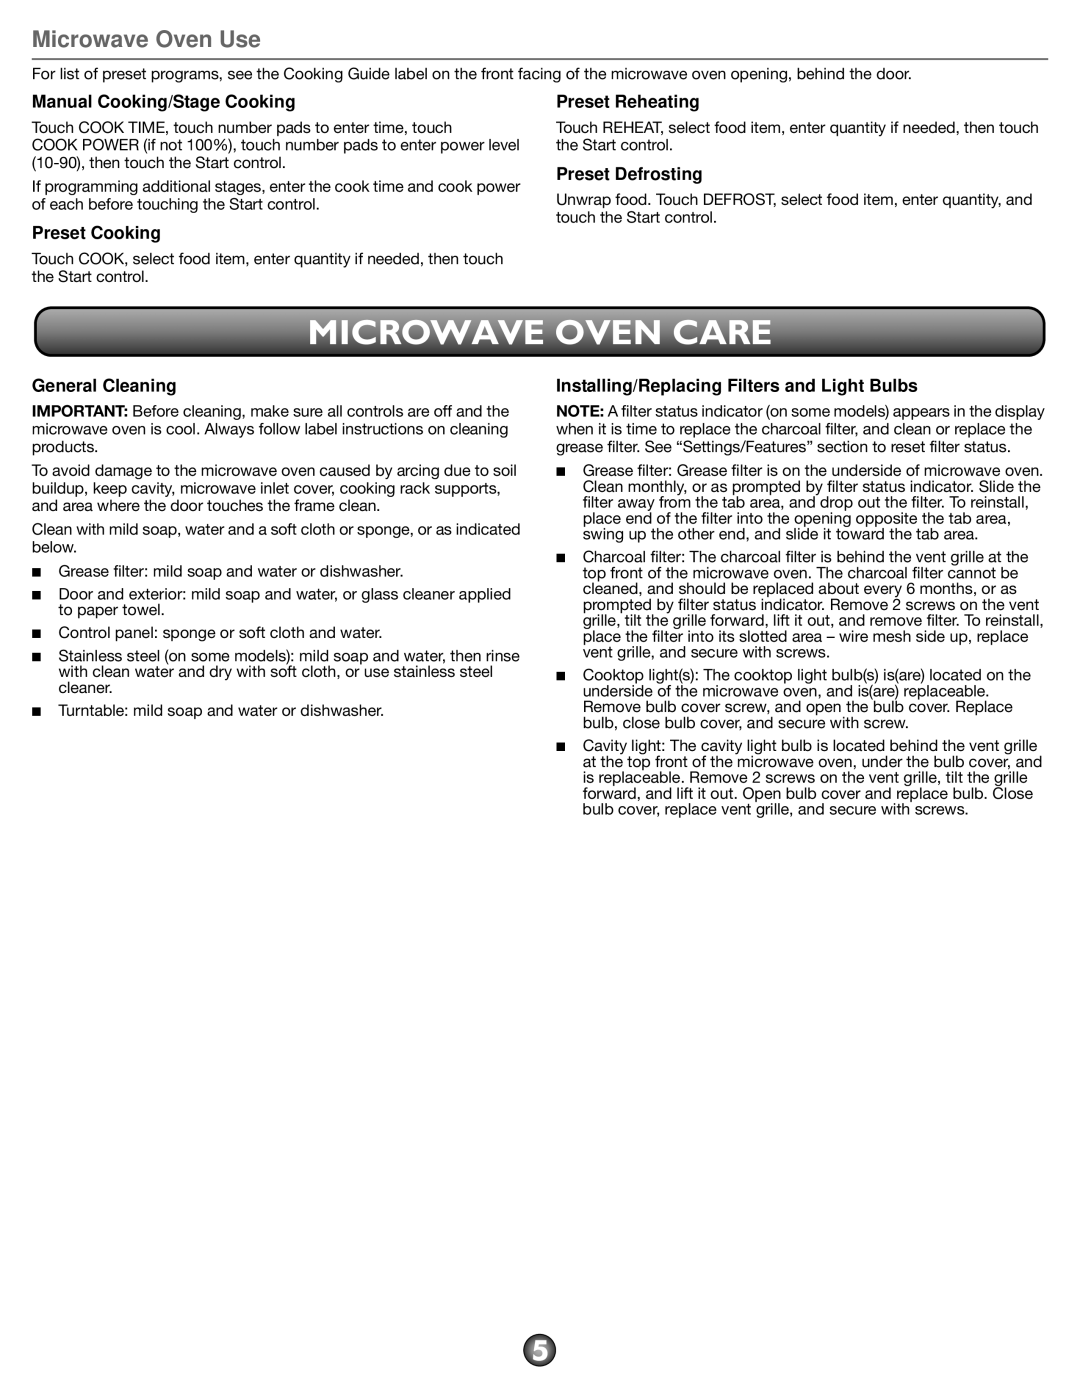 Whirlpool W10669285A important safety instructions Microwave Oven Care, Microwave Oven Use 